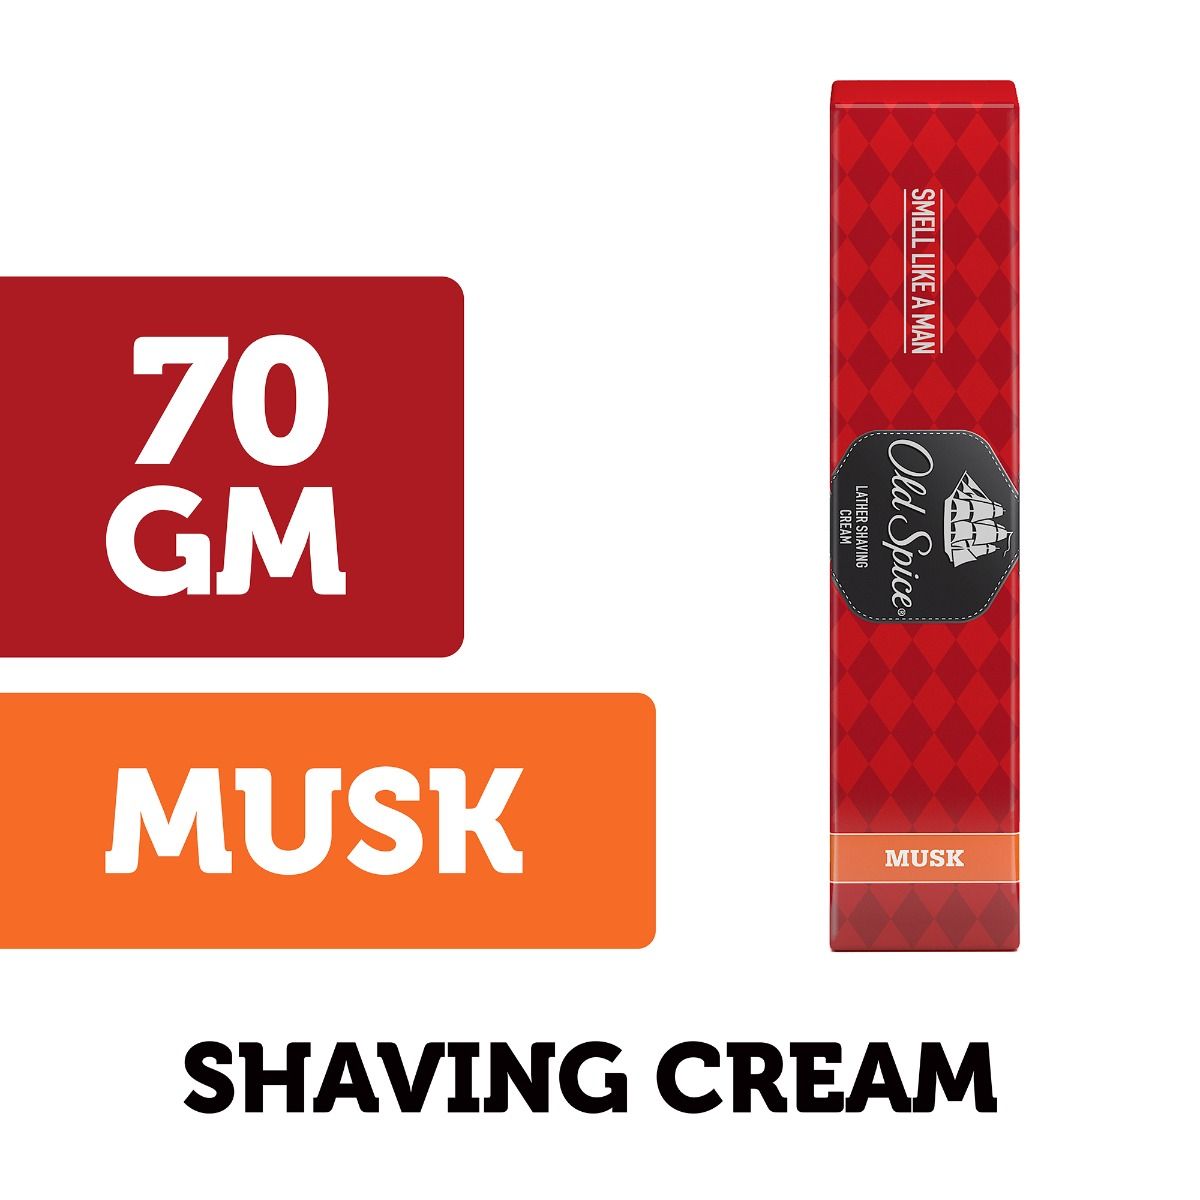 Buy Old Spice Musk Lather Shaving Cream, 70 gm Online